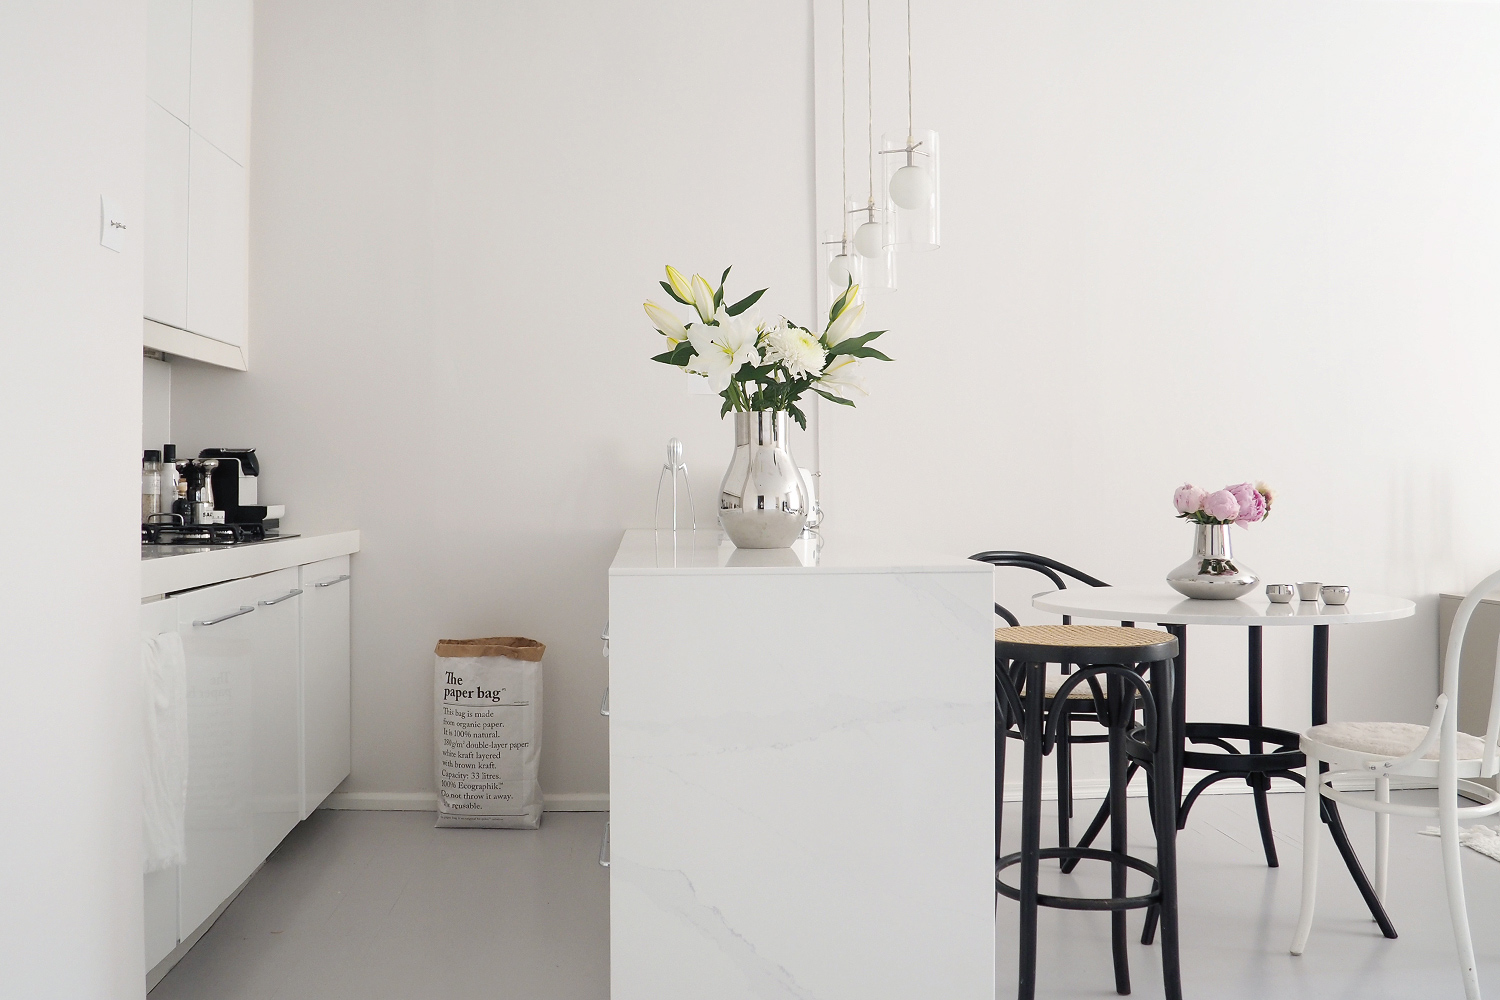 Image of Charandthecity Silestone Calacatta Gold 8 in Silestone revamps the kitchen and dining room of influencer Carita Alfthan - Cosentino